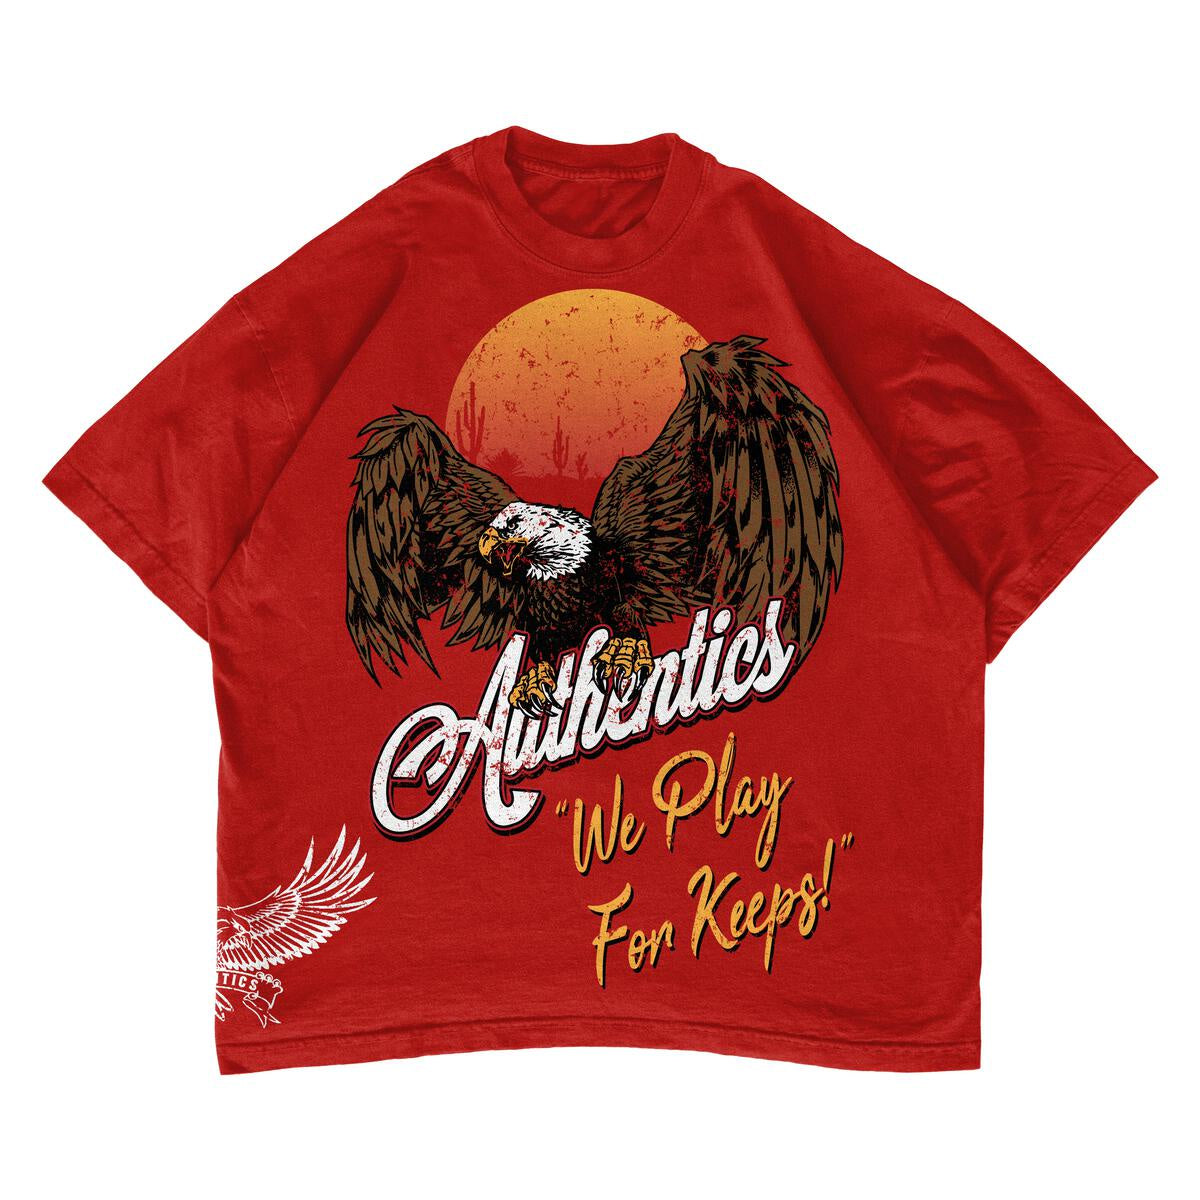 Authentics EAGLES Tee - Red  (EAGLE-Red)